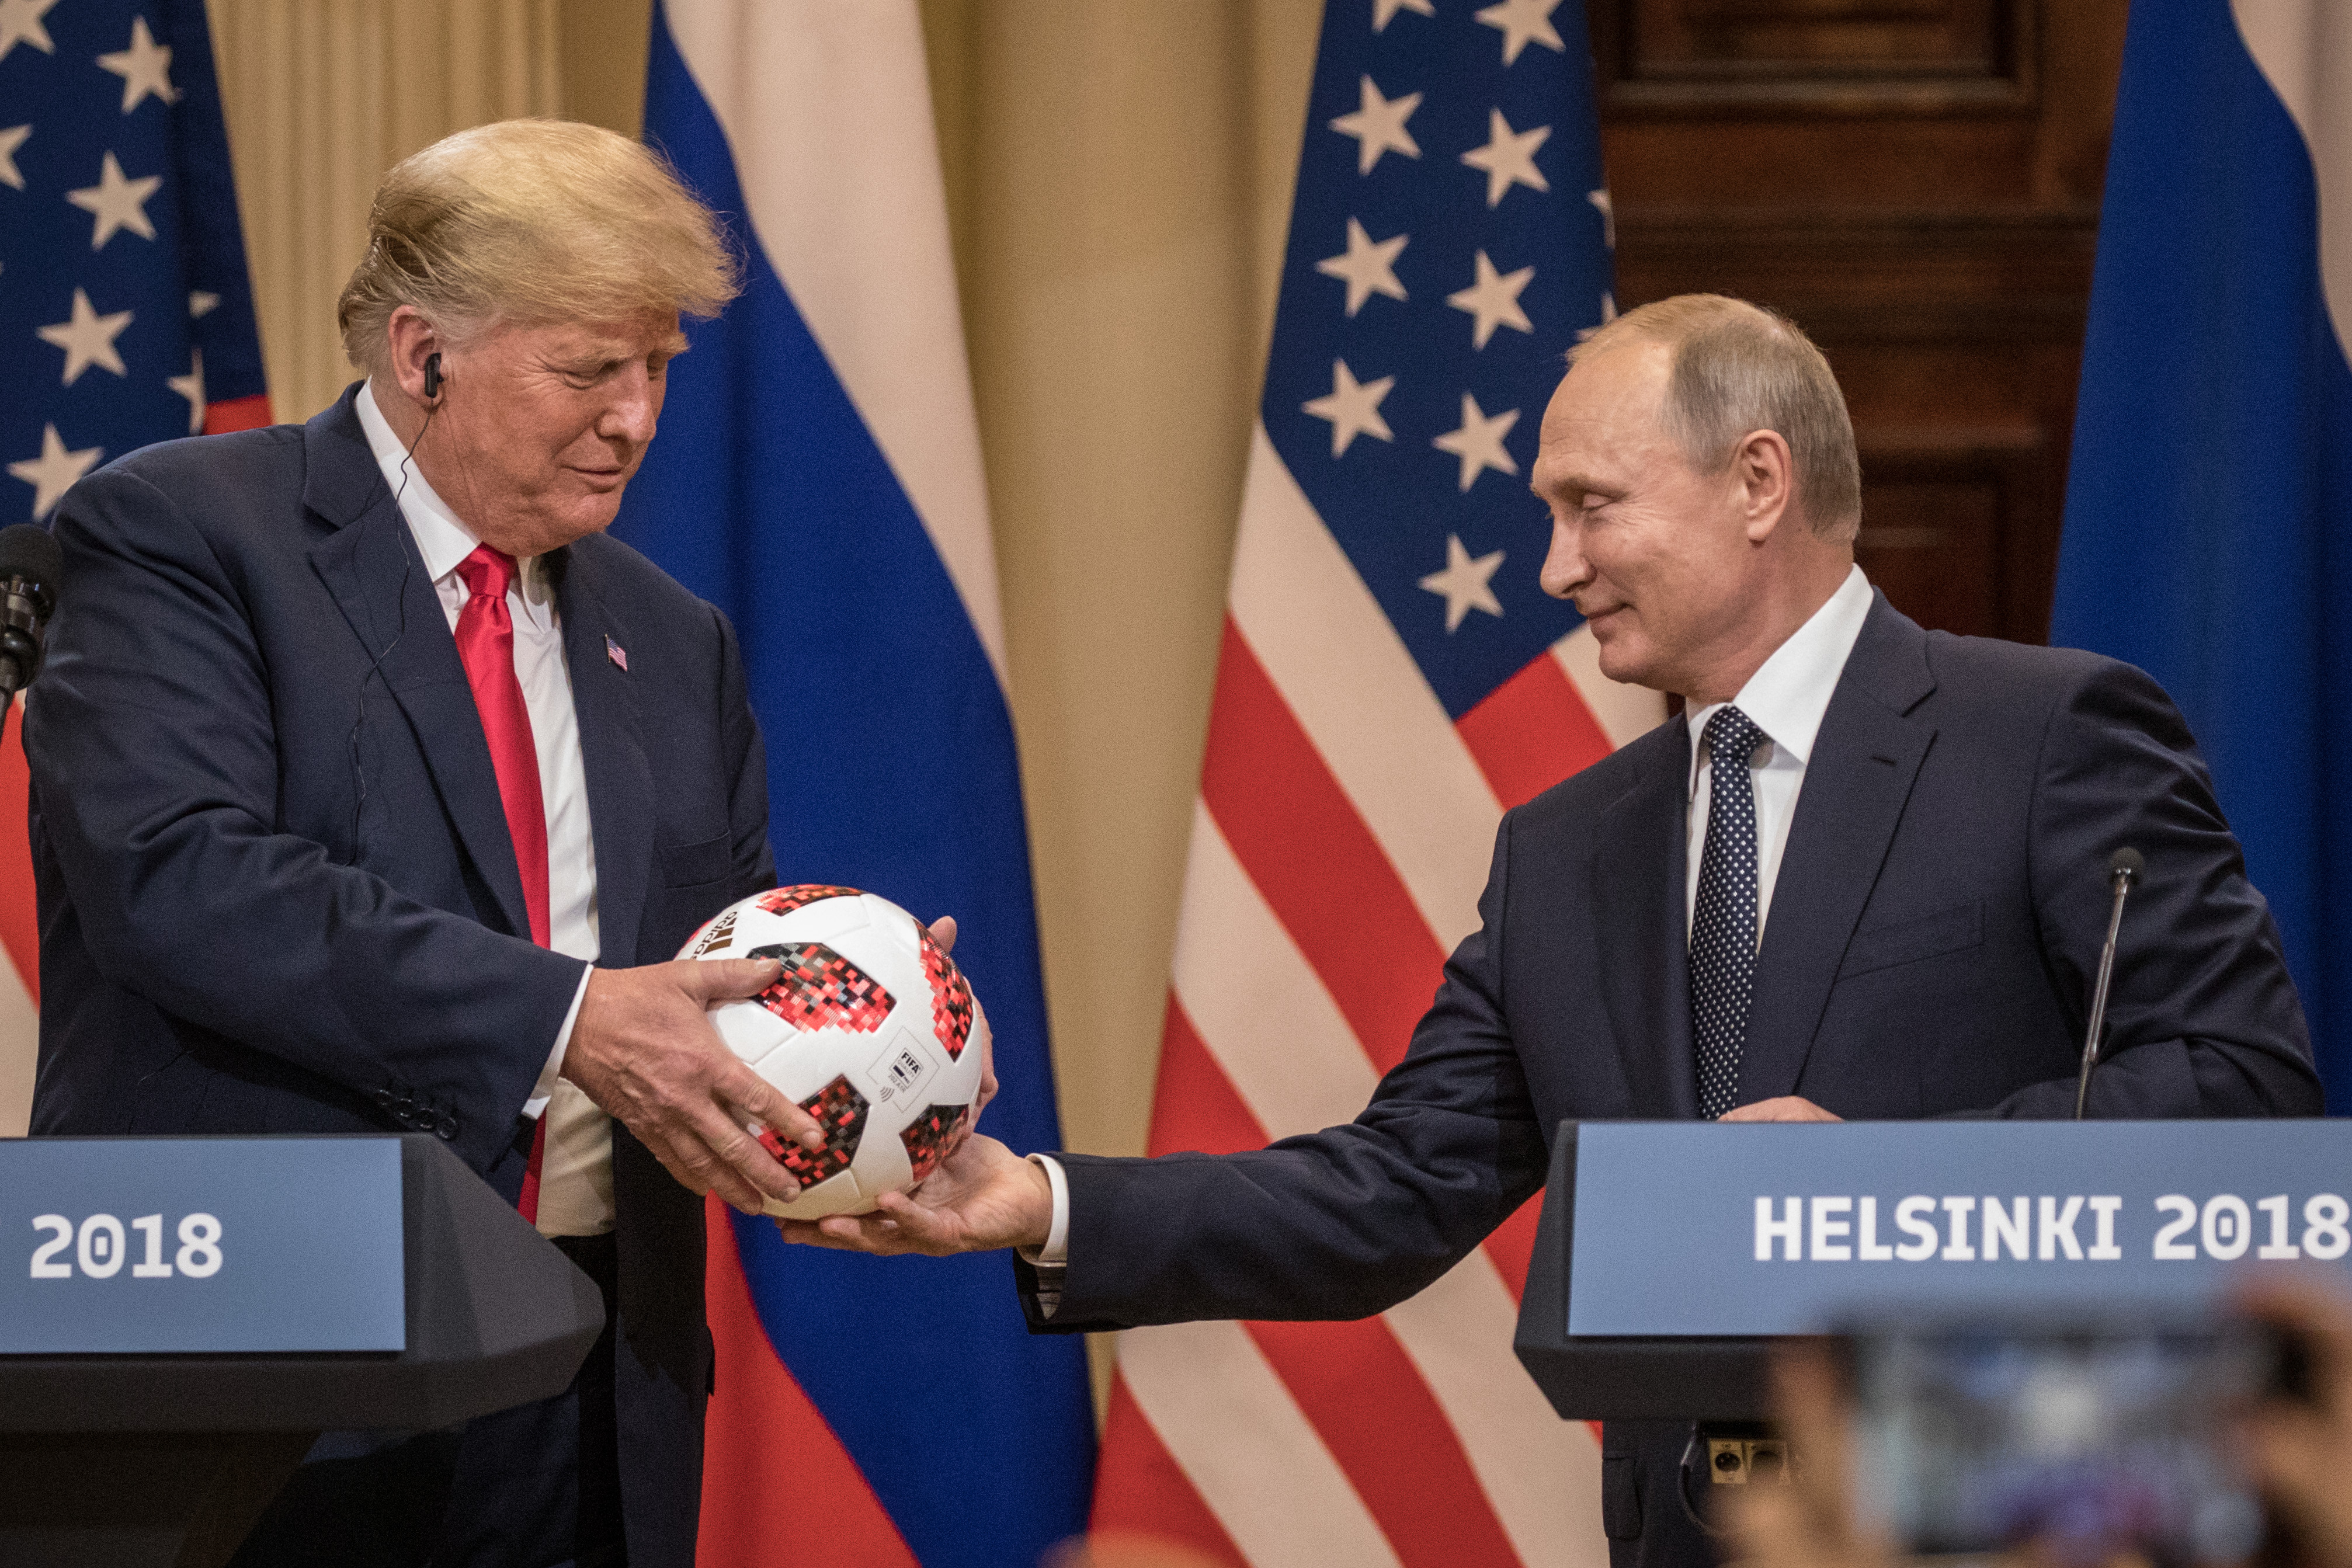 HELSINKI, FINLAND - JULY 16: Russian President Vladimir Putin hands U.S. President Donald Trump (L) a World Cup football during a joint press conference after their summit on July 16, 2018 in Helsinki, Finland. The two leaders met one-on-one and discussed a range of issues including the 2016 U.S E/Getty Images)